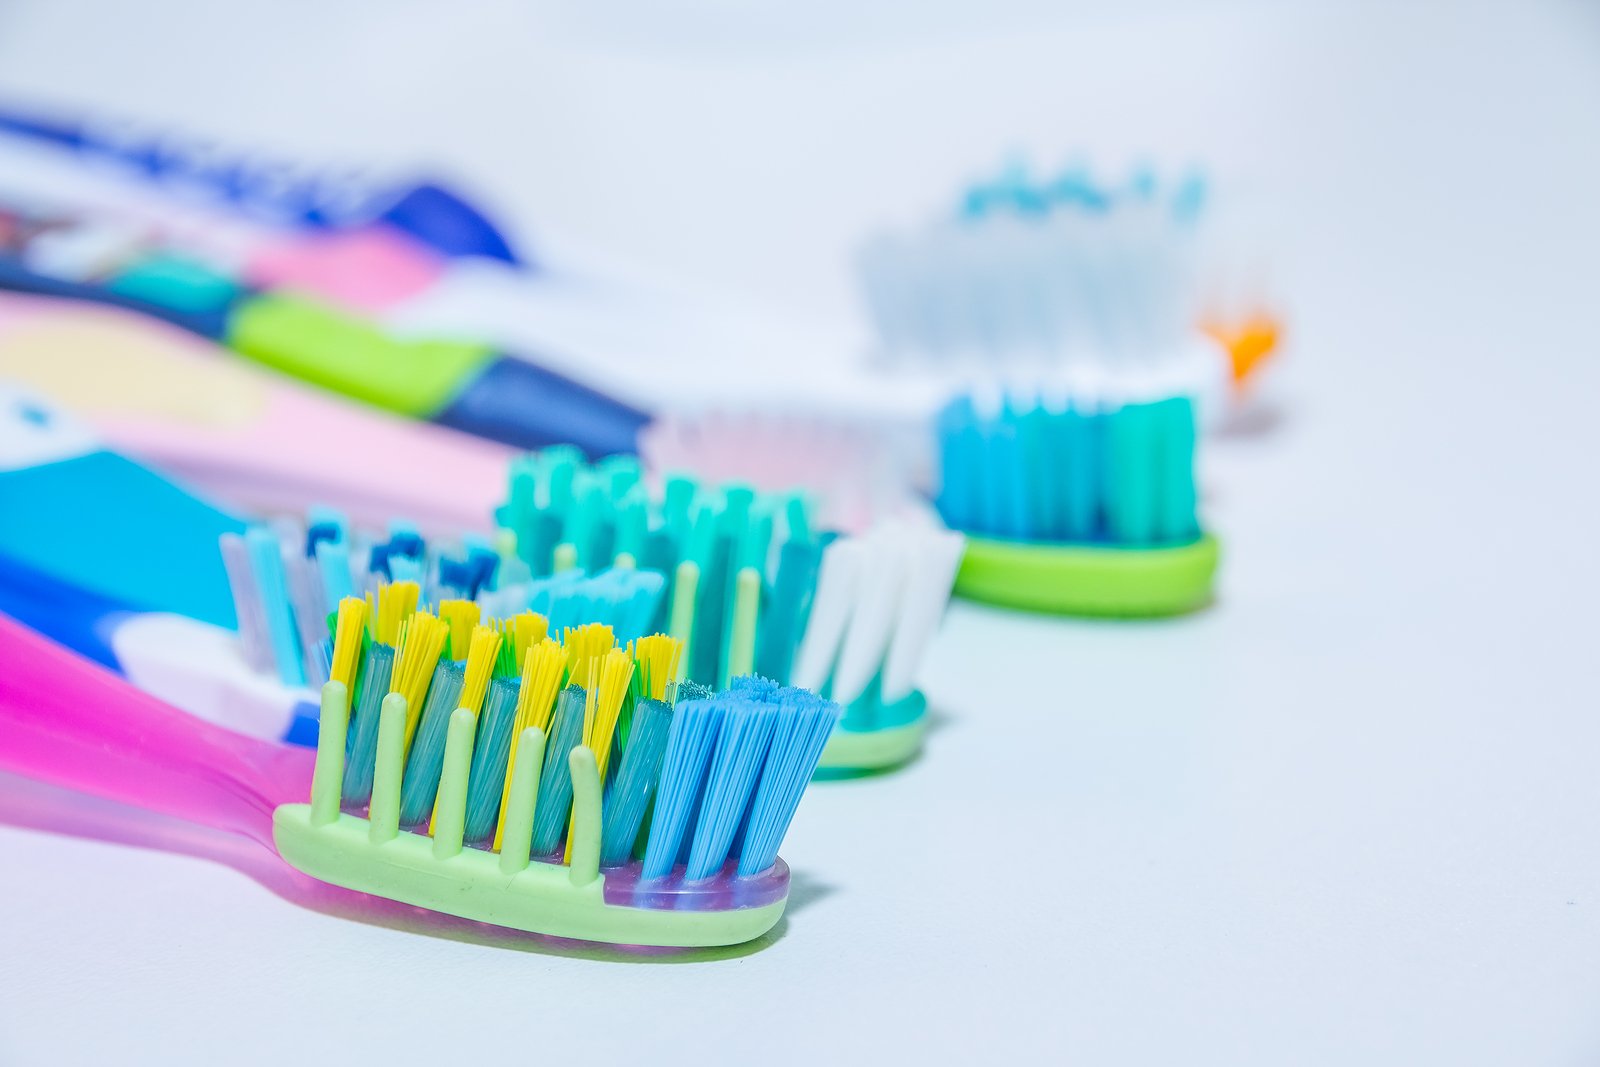 Featured image for “How to Choose the Best Toothbrush for You and Your Family”